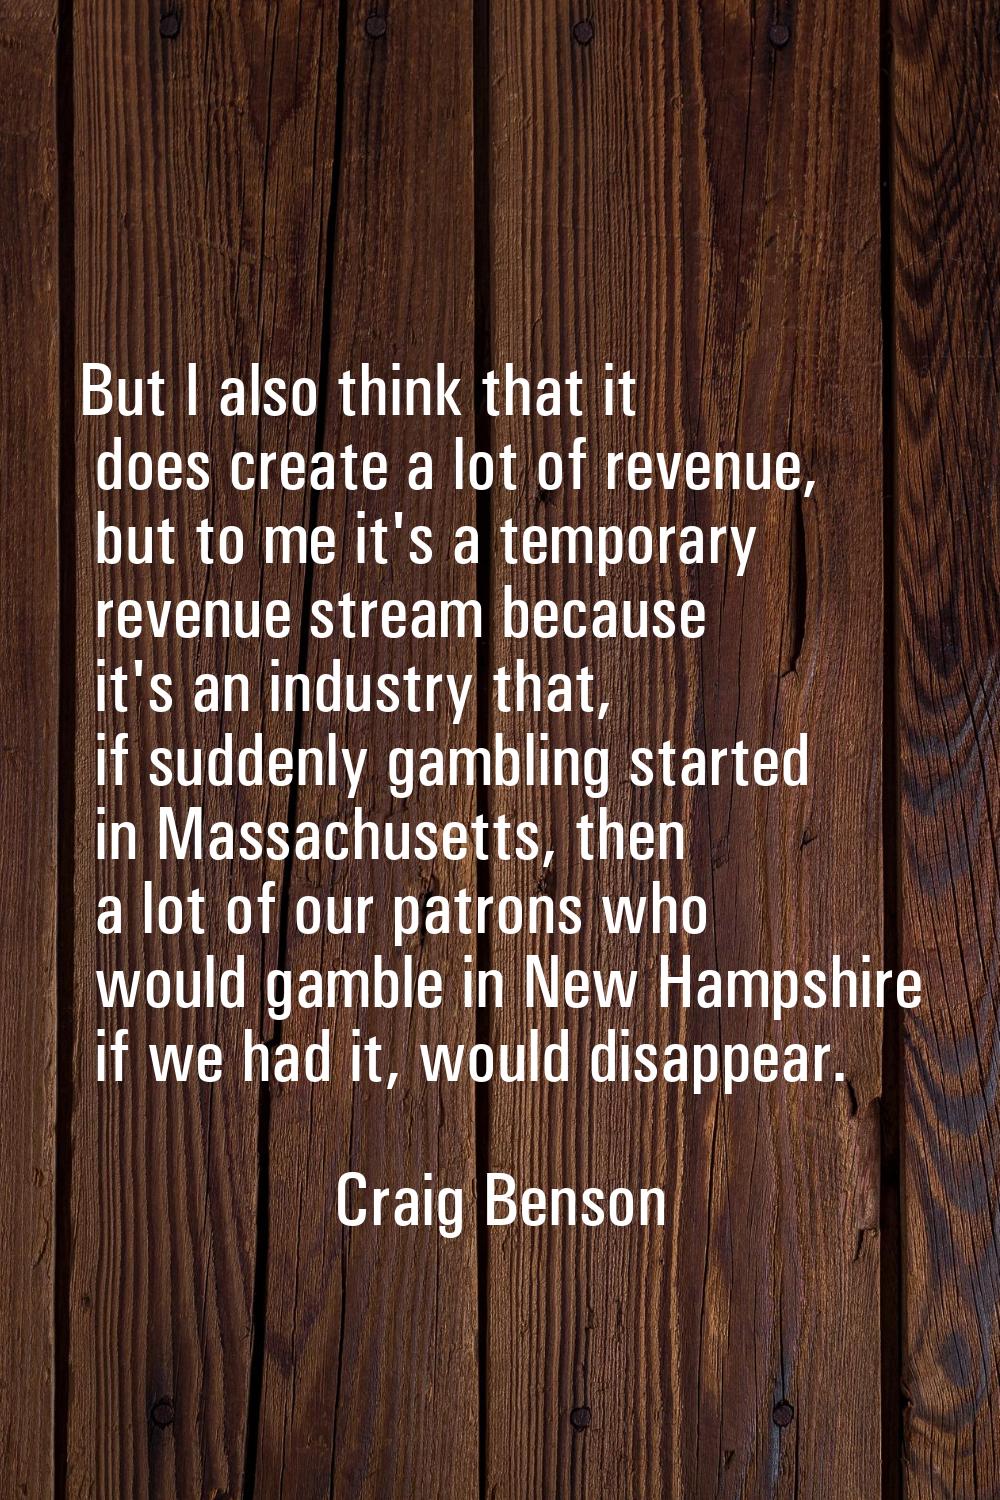 But I also think that it does create a lot of revenue, but to me it's a temporary revenue stream be